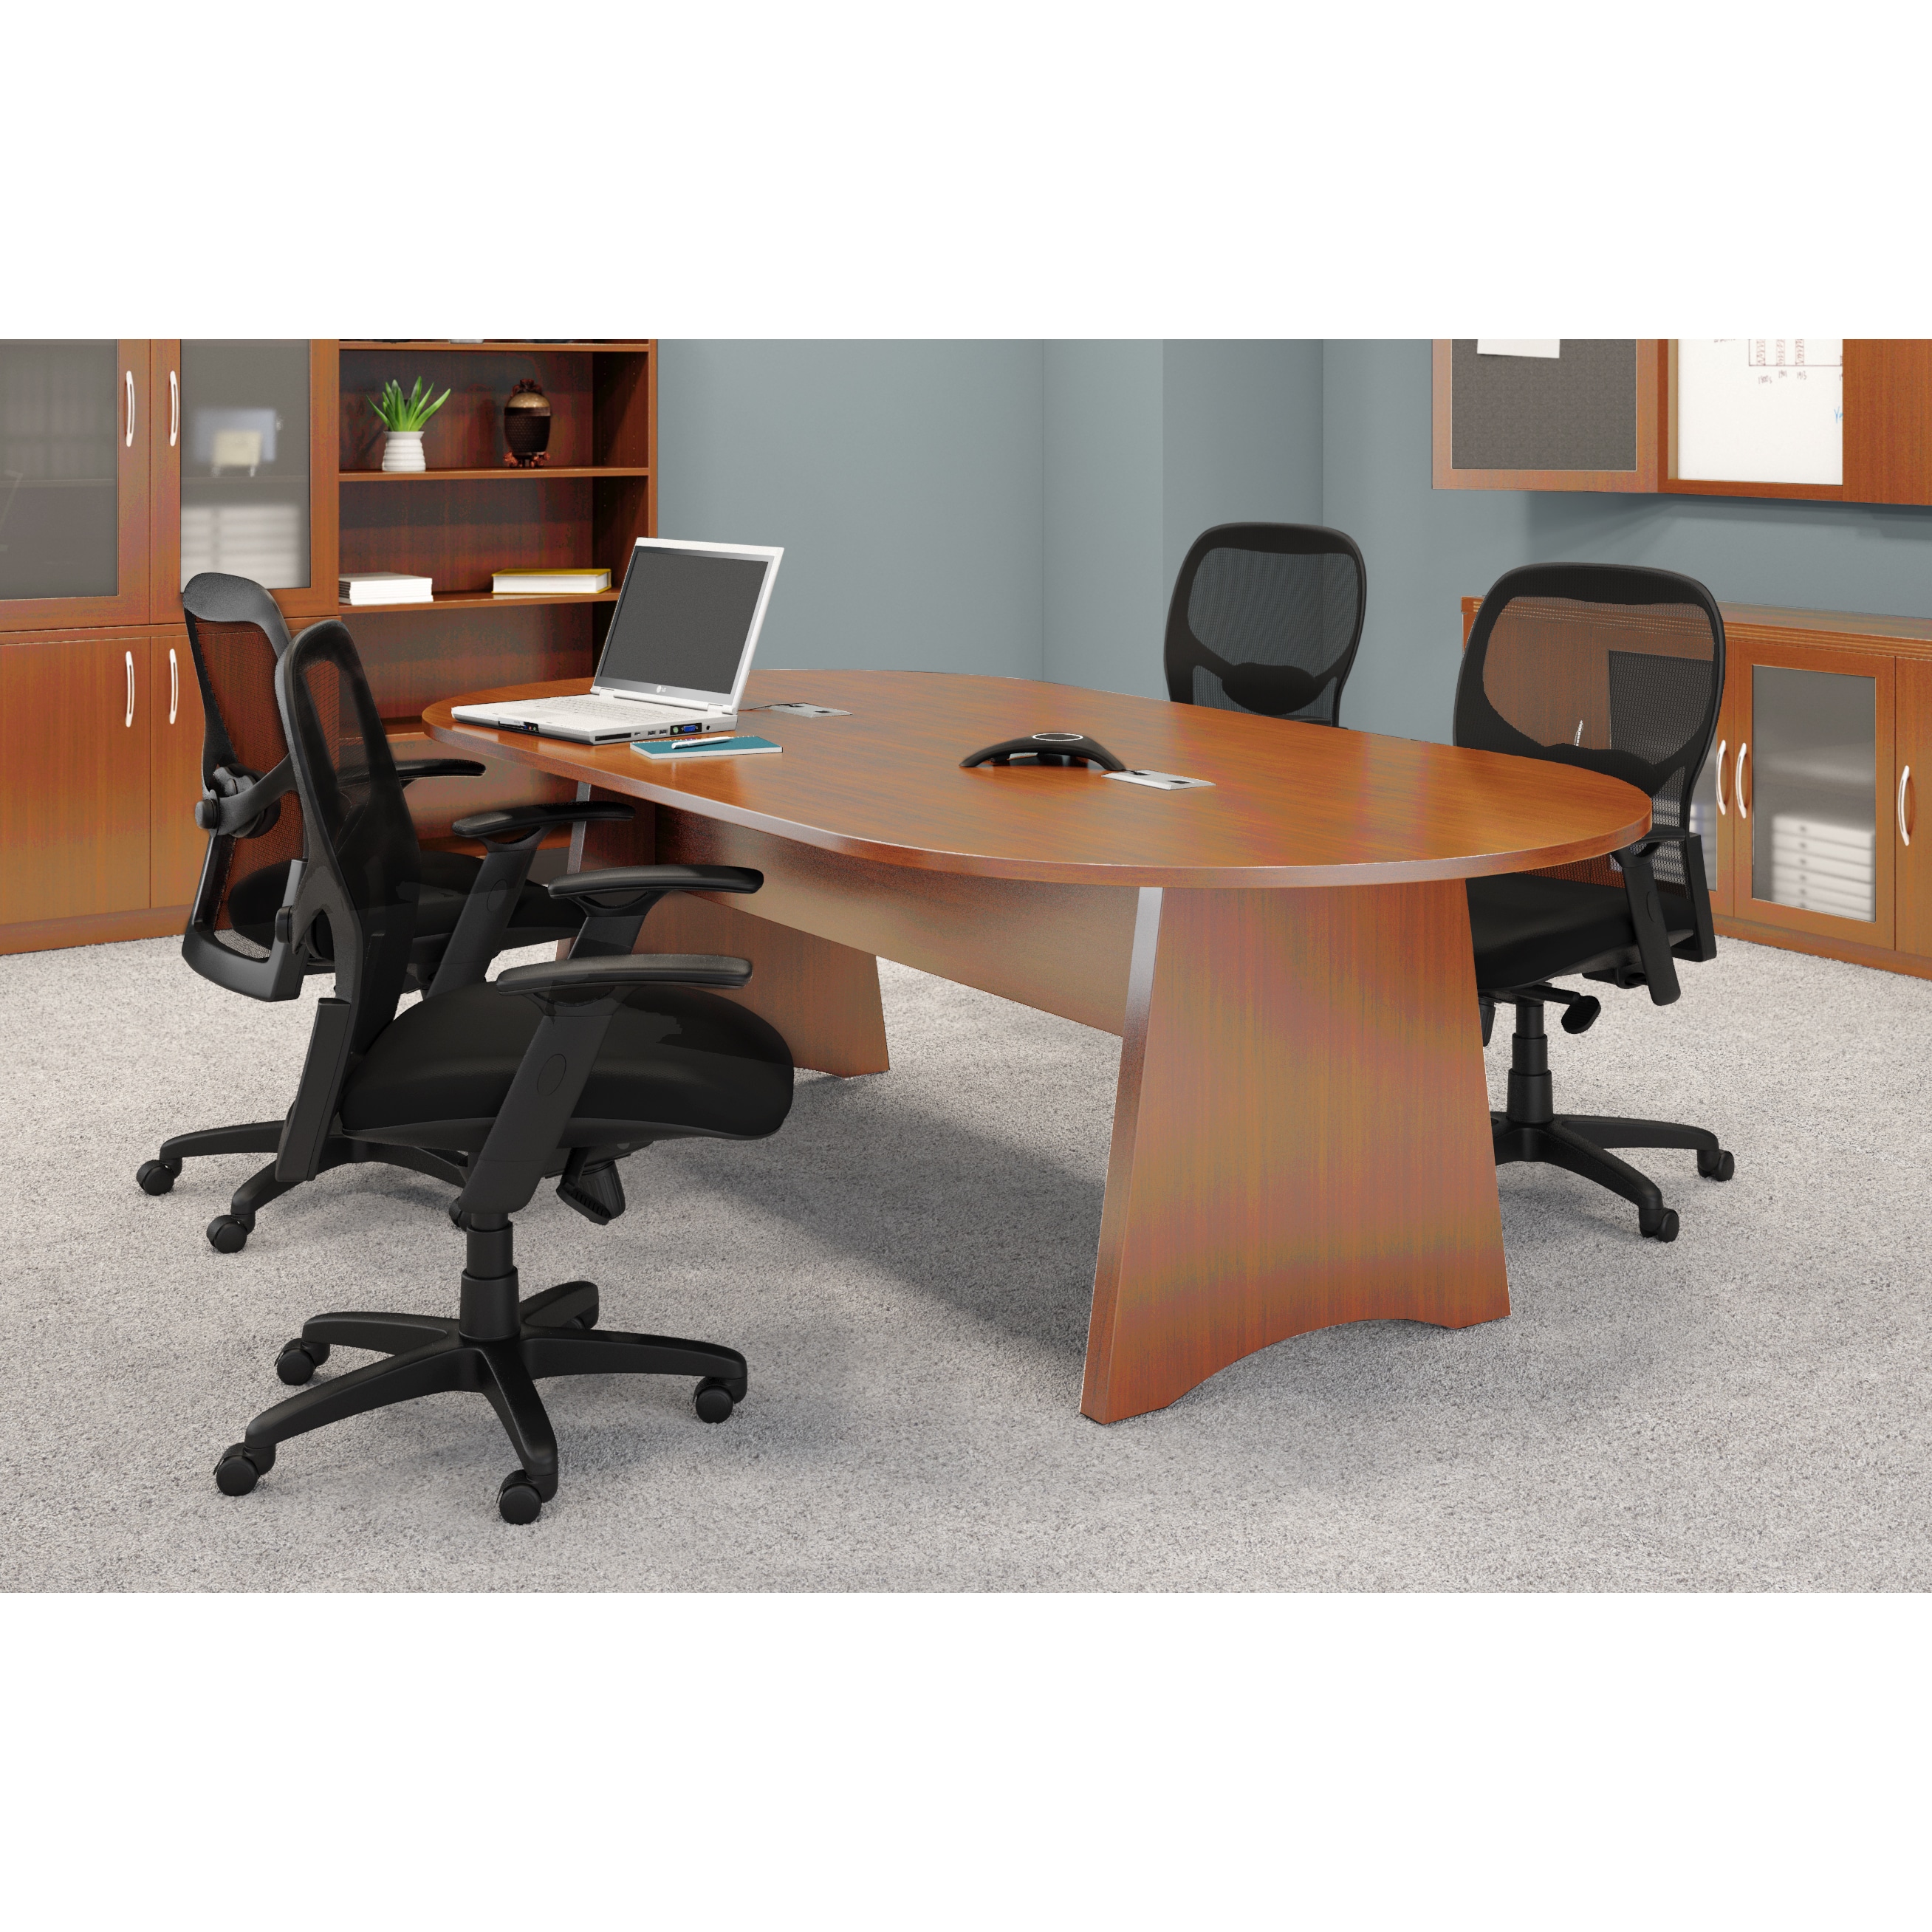 Shop Mayline Brighton 10 Foot Conference Table Overstock 6223380